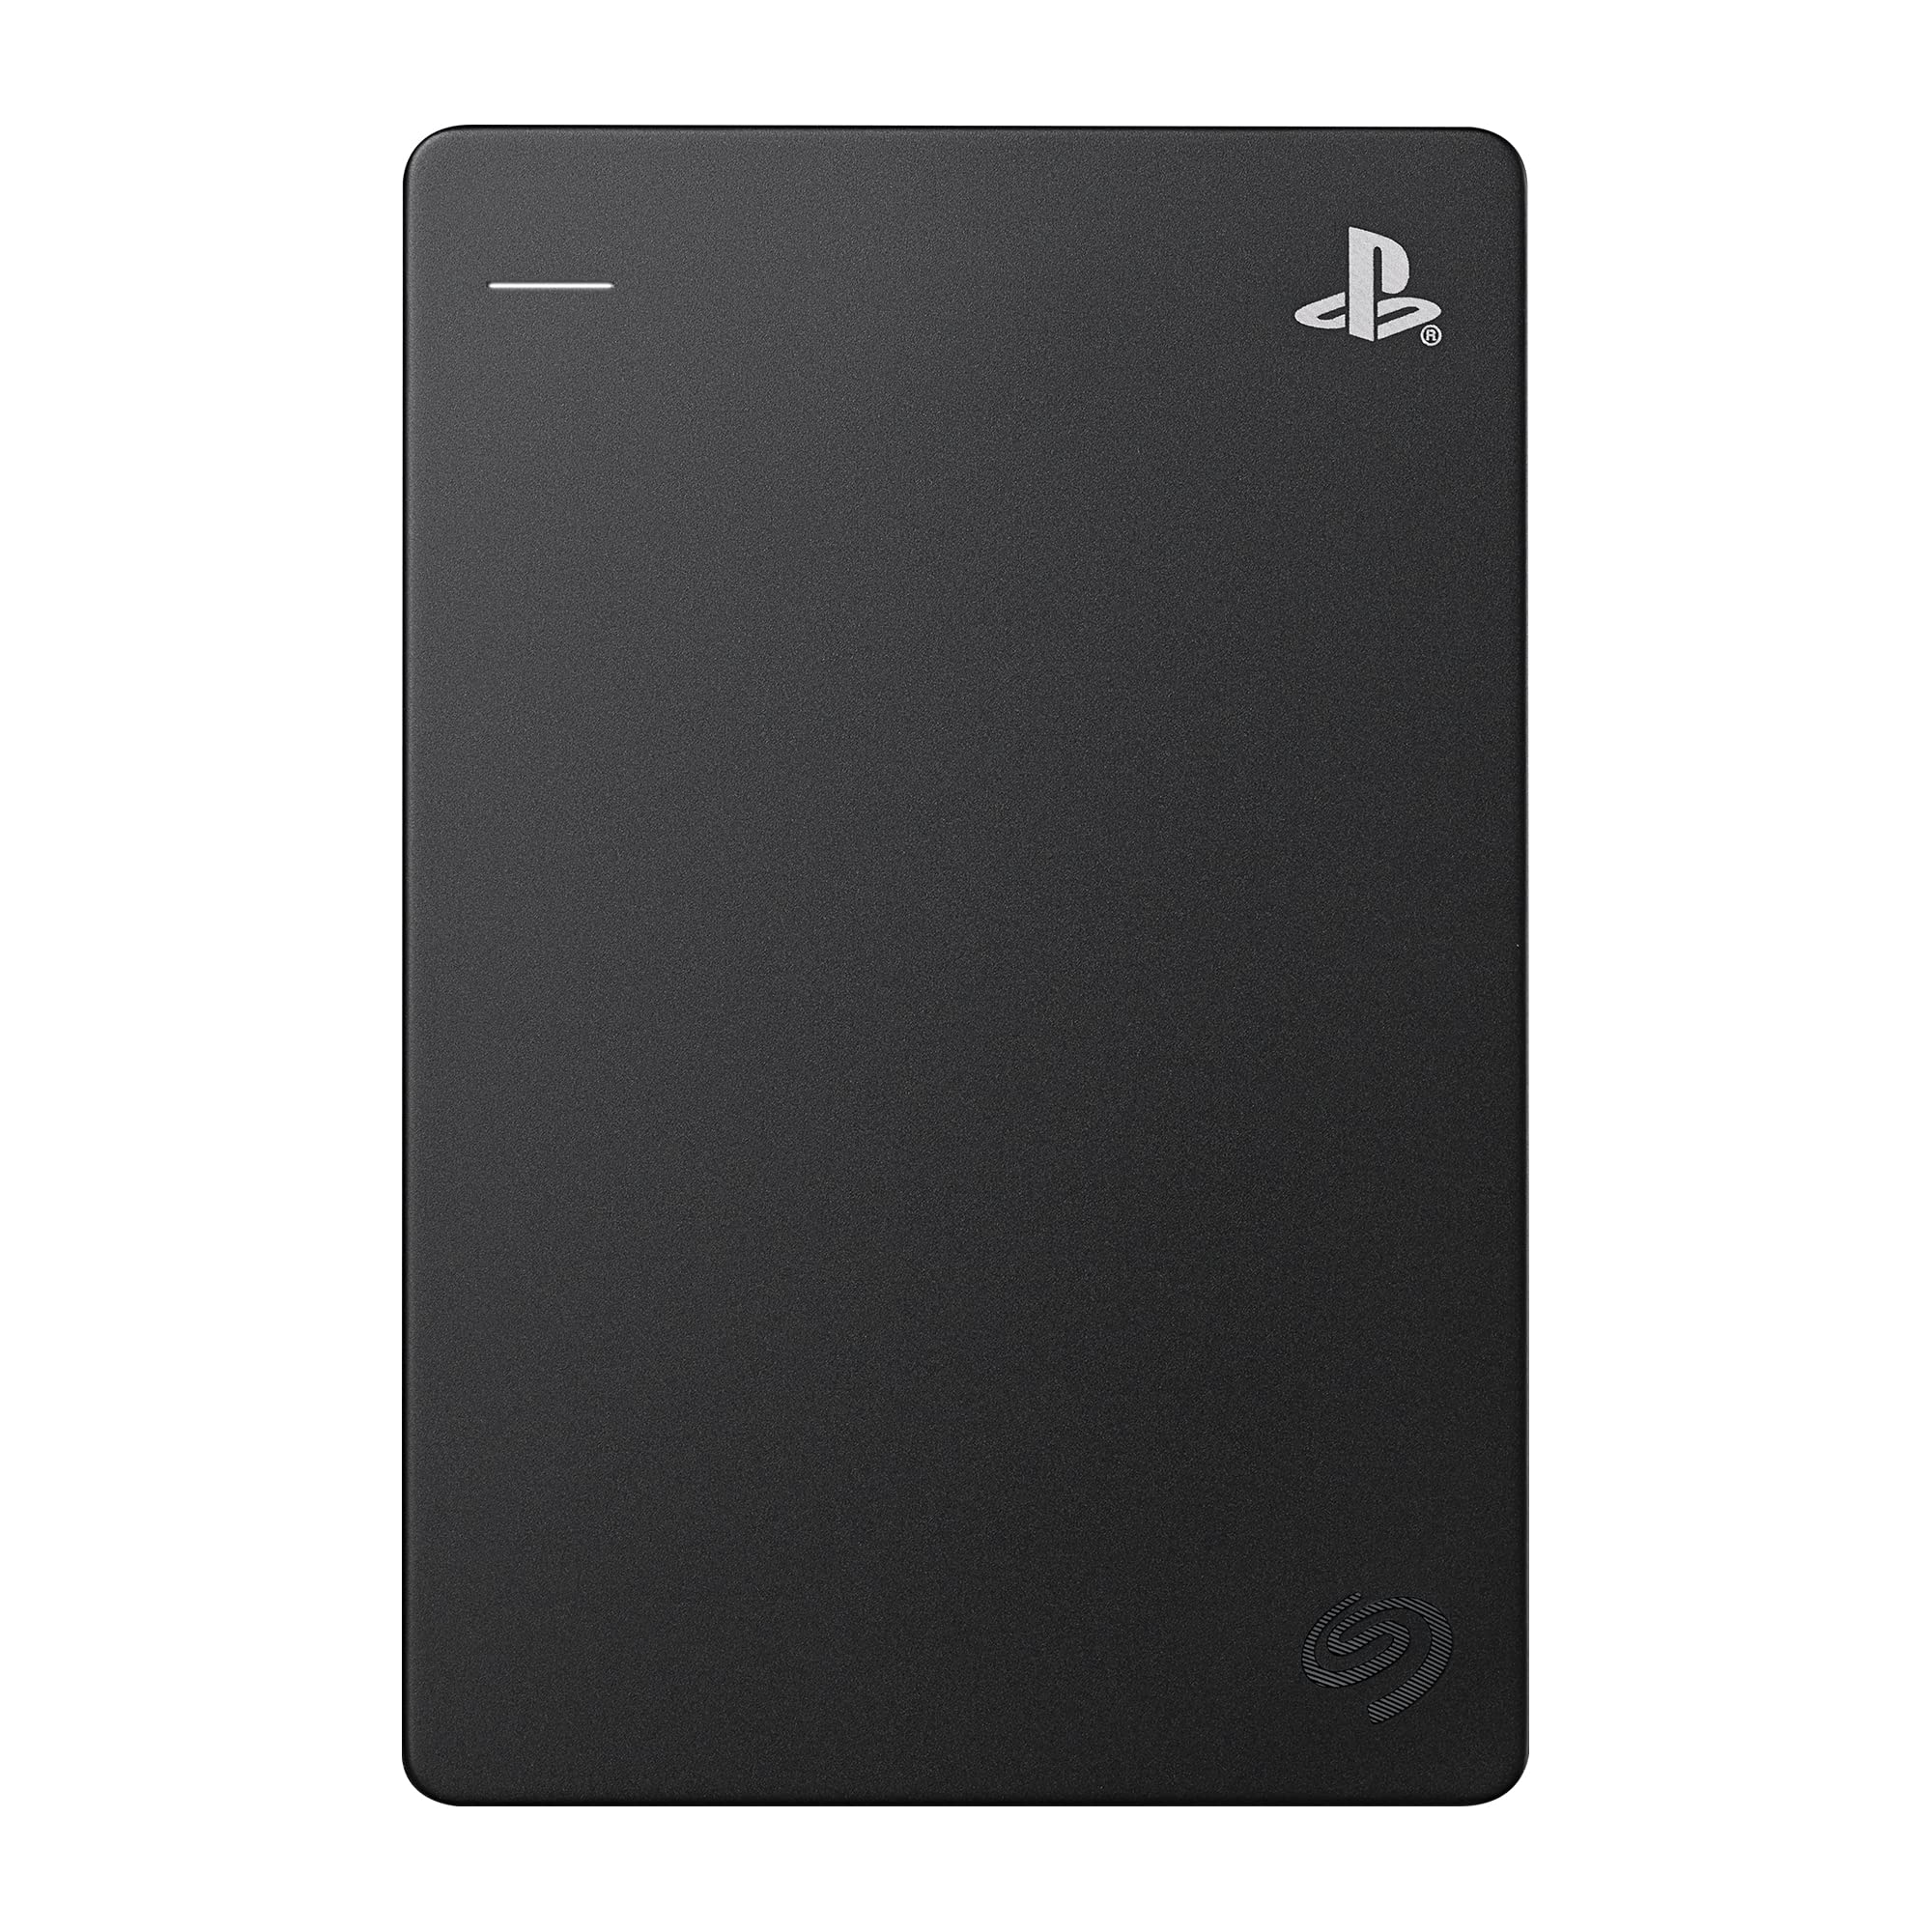 GAME DRIVE HDD 4TB PLAYSTATION